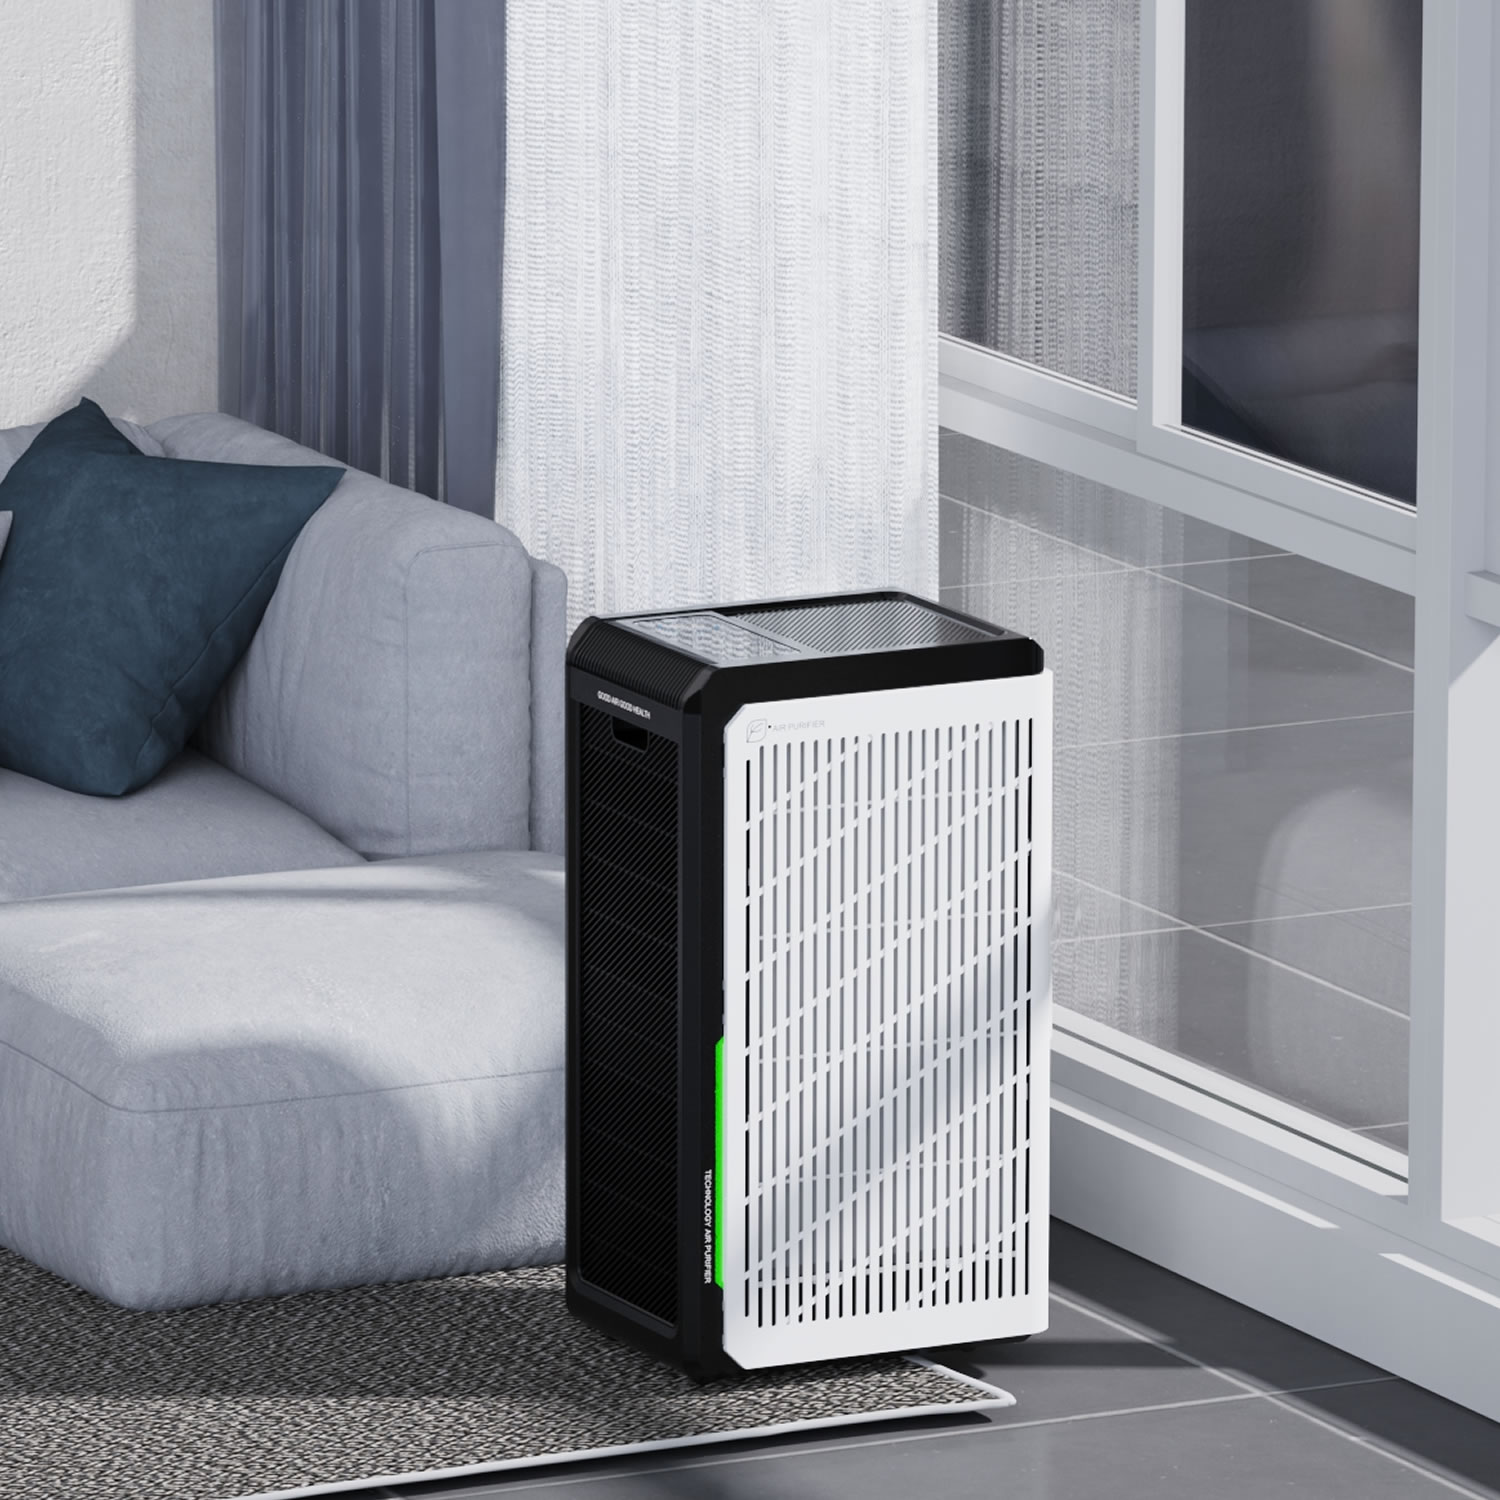 What are the uses of New arrival medical grade air purifier products